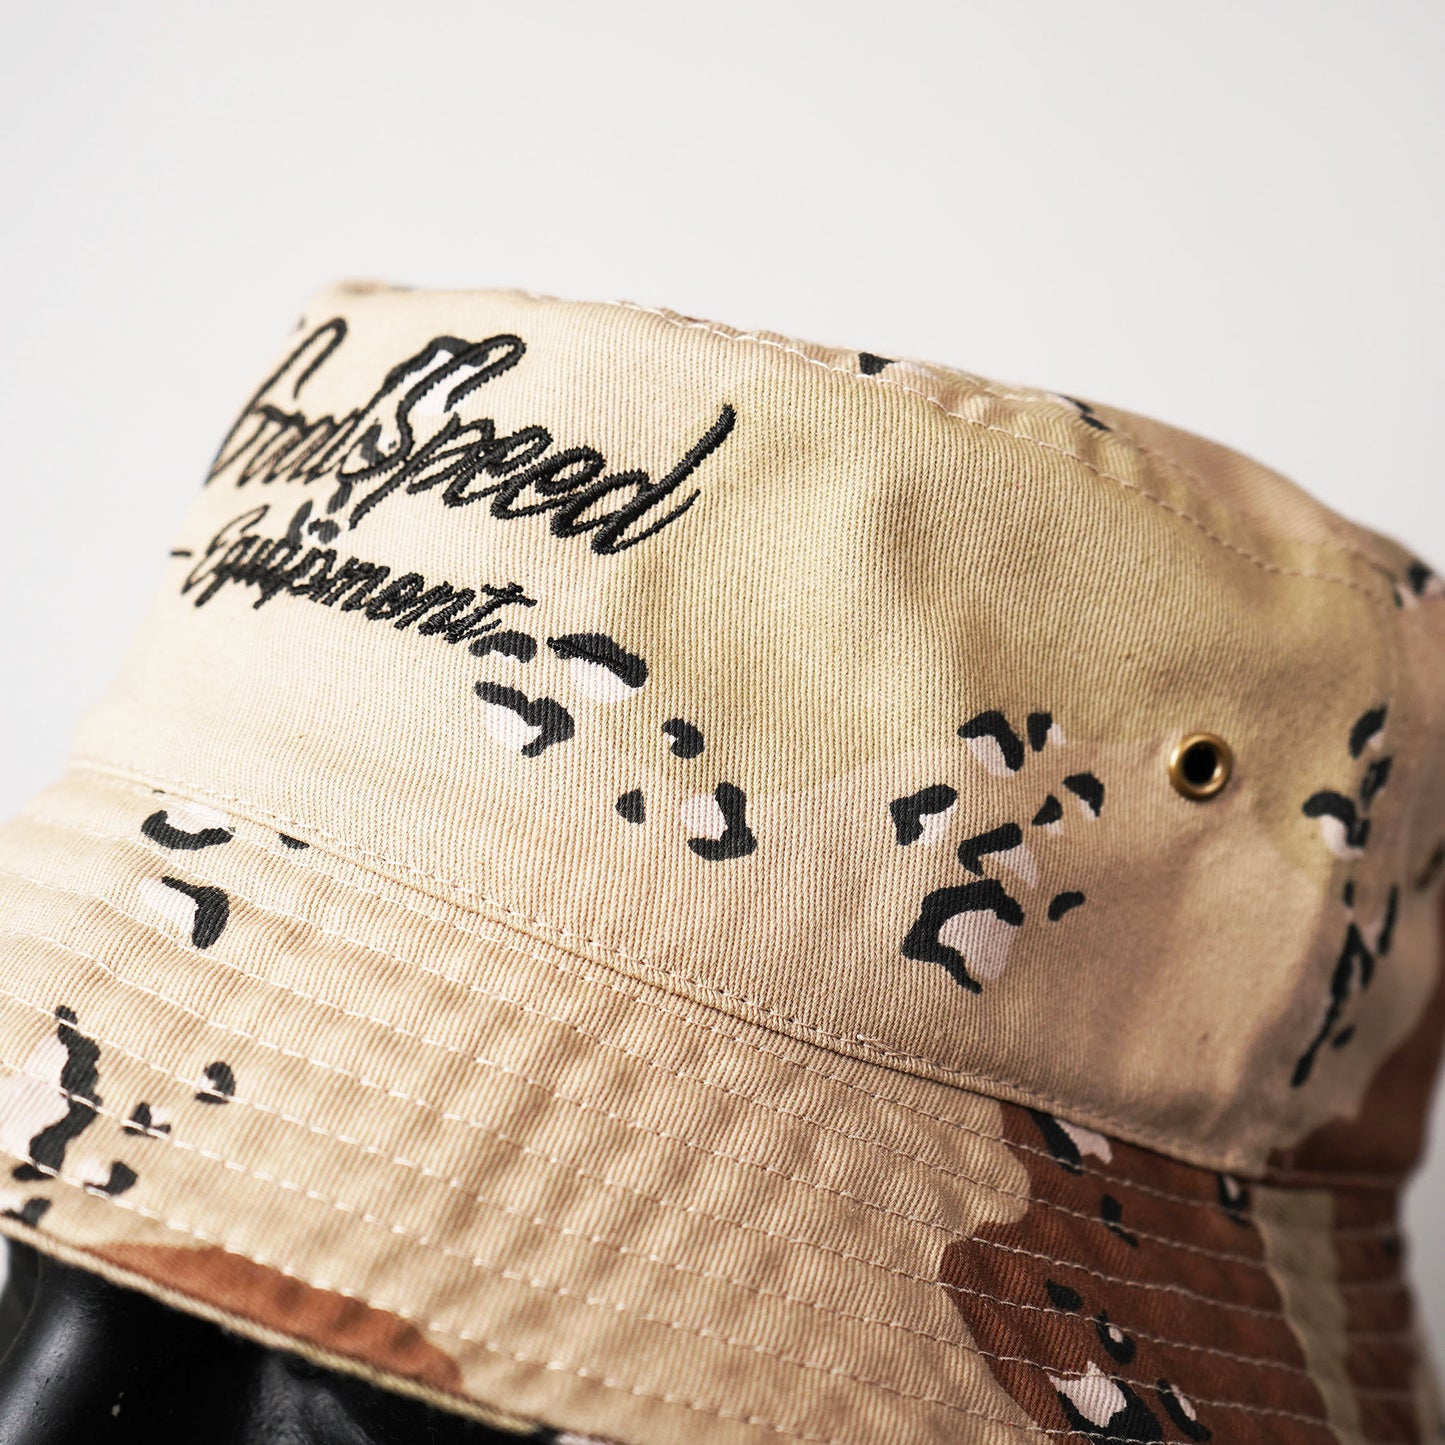 GOODSPEED equipment Cotton Bucket Hat <Limited color>